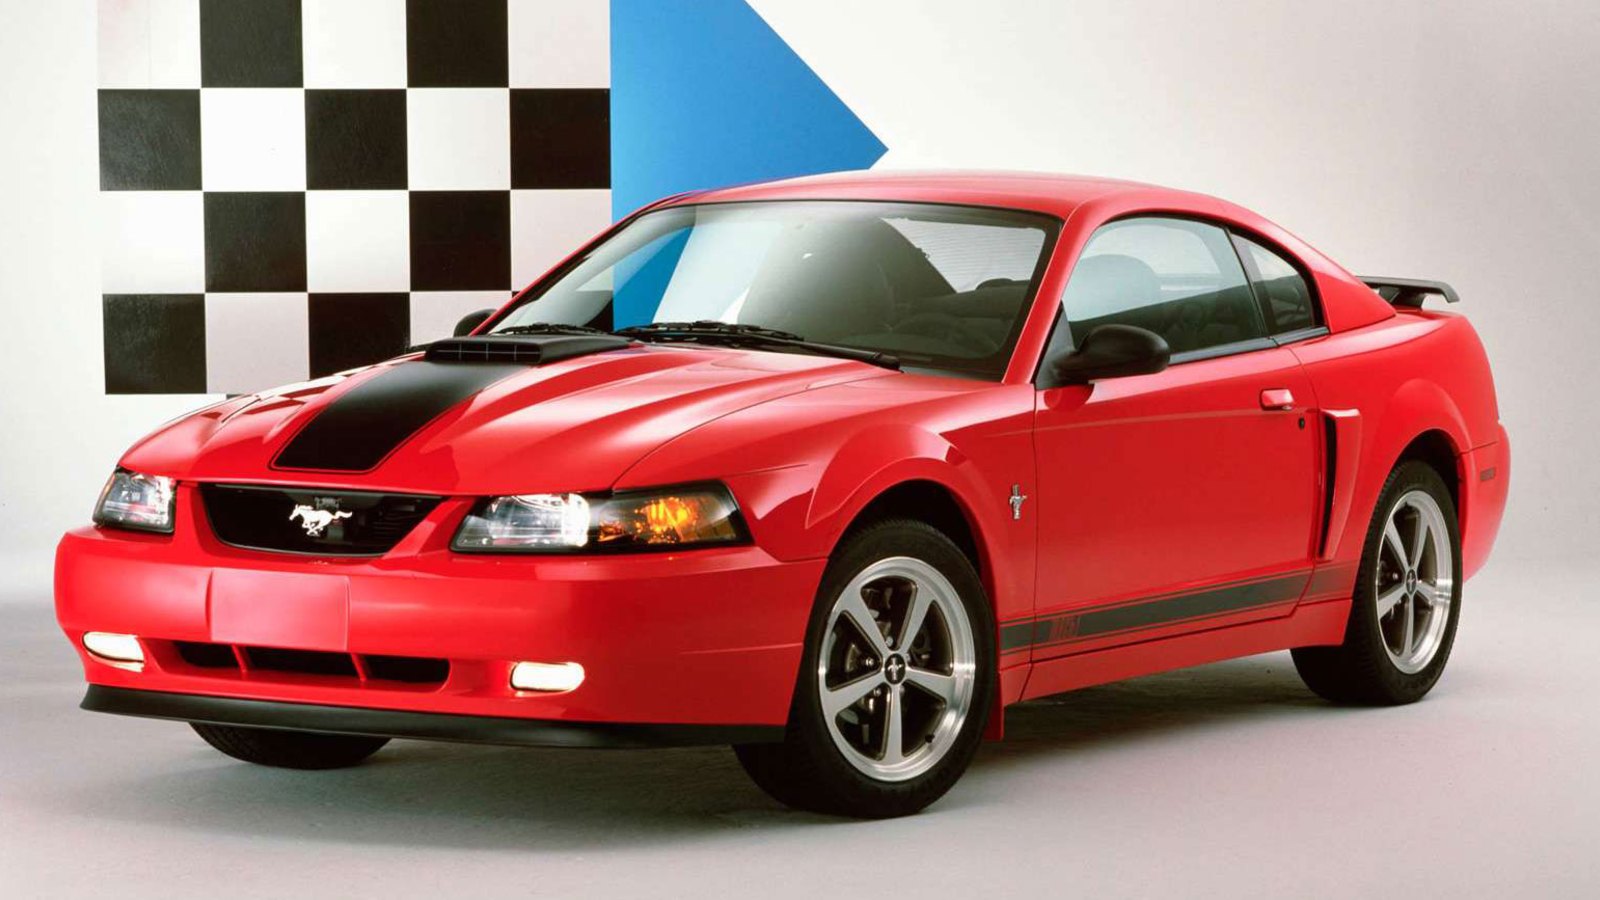 2003 Mustang Mach 1 Production Numbers